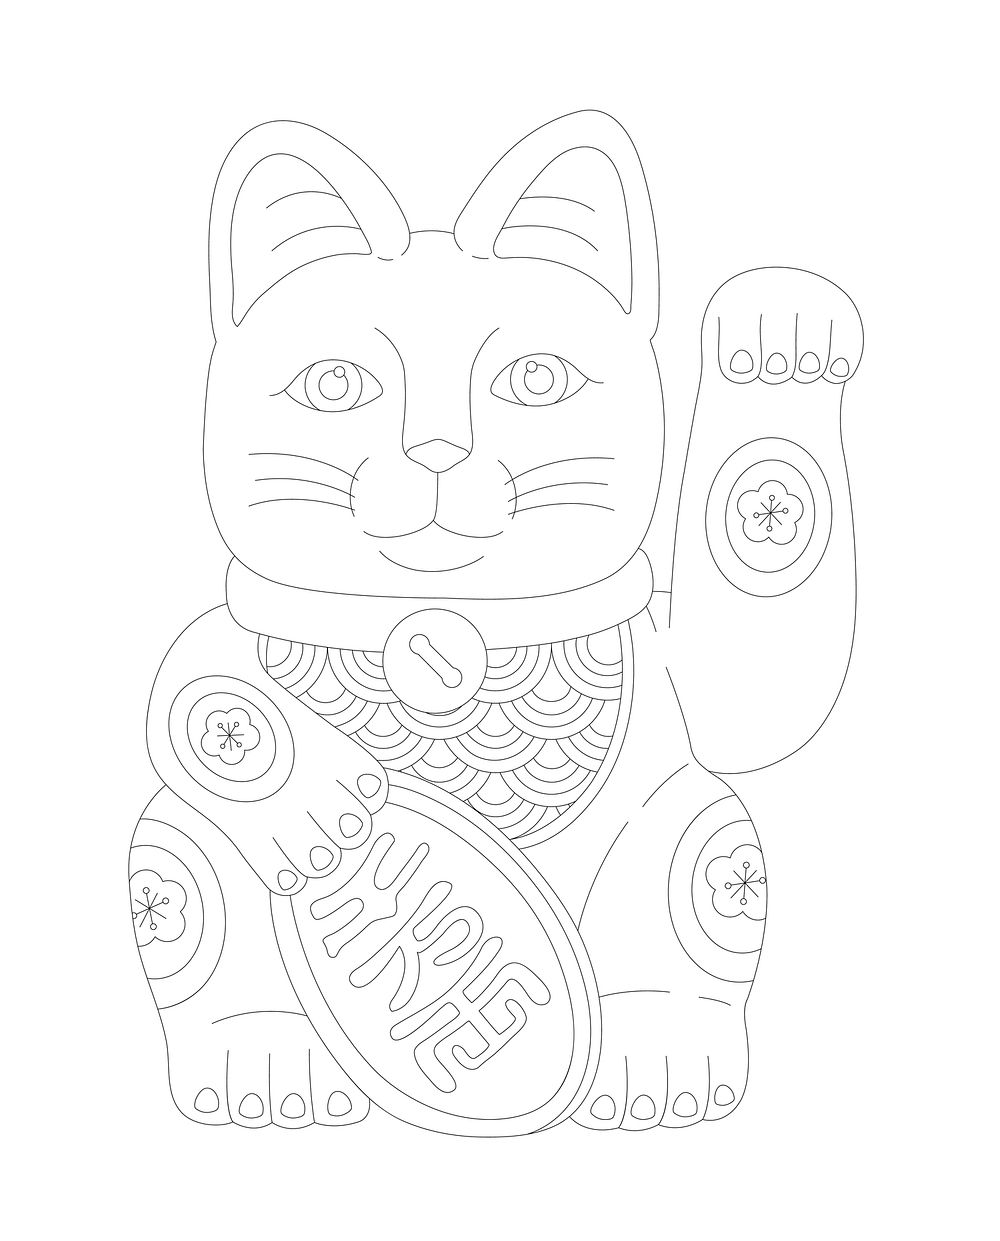 Japanese beckoning cat adult coloring